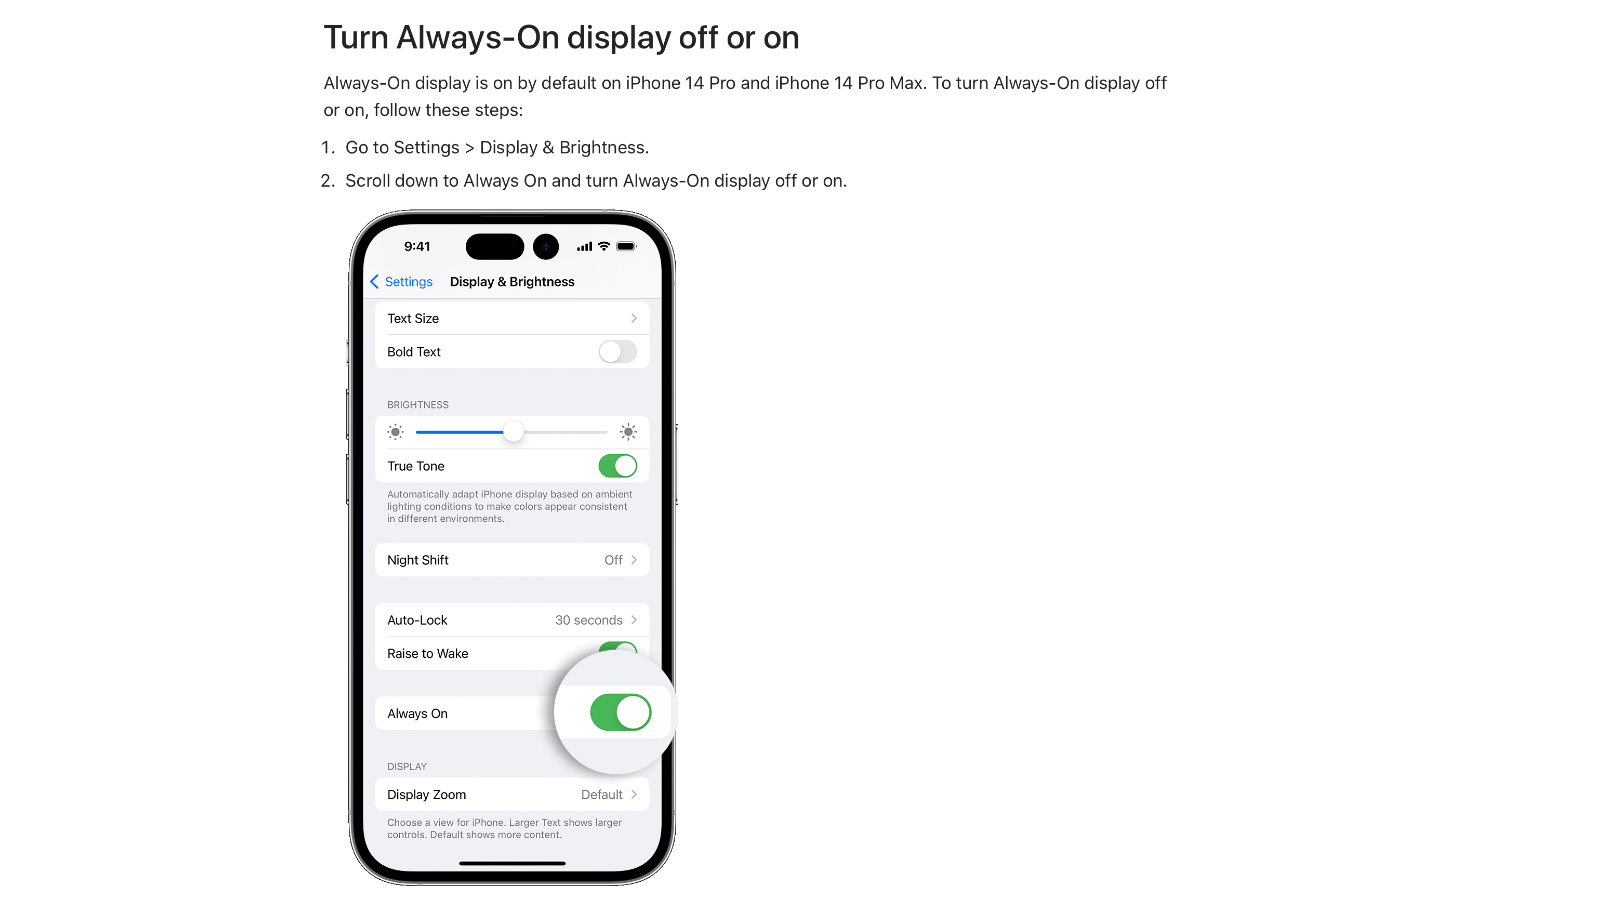 Apple Repeatedly Showing iPhone 14 Pro Design With No Dynamic Island